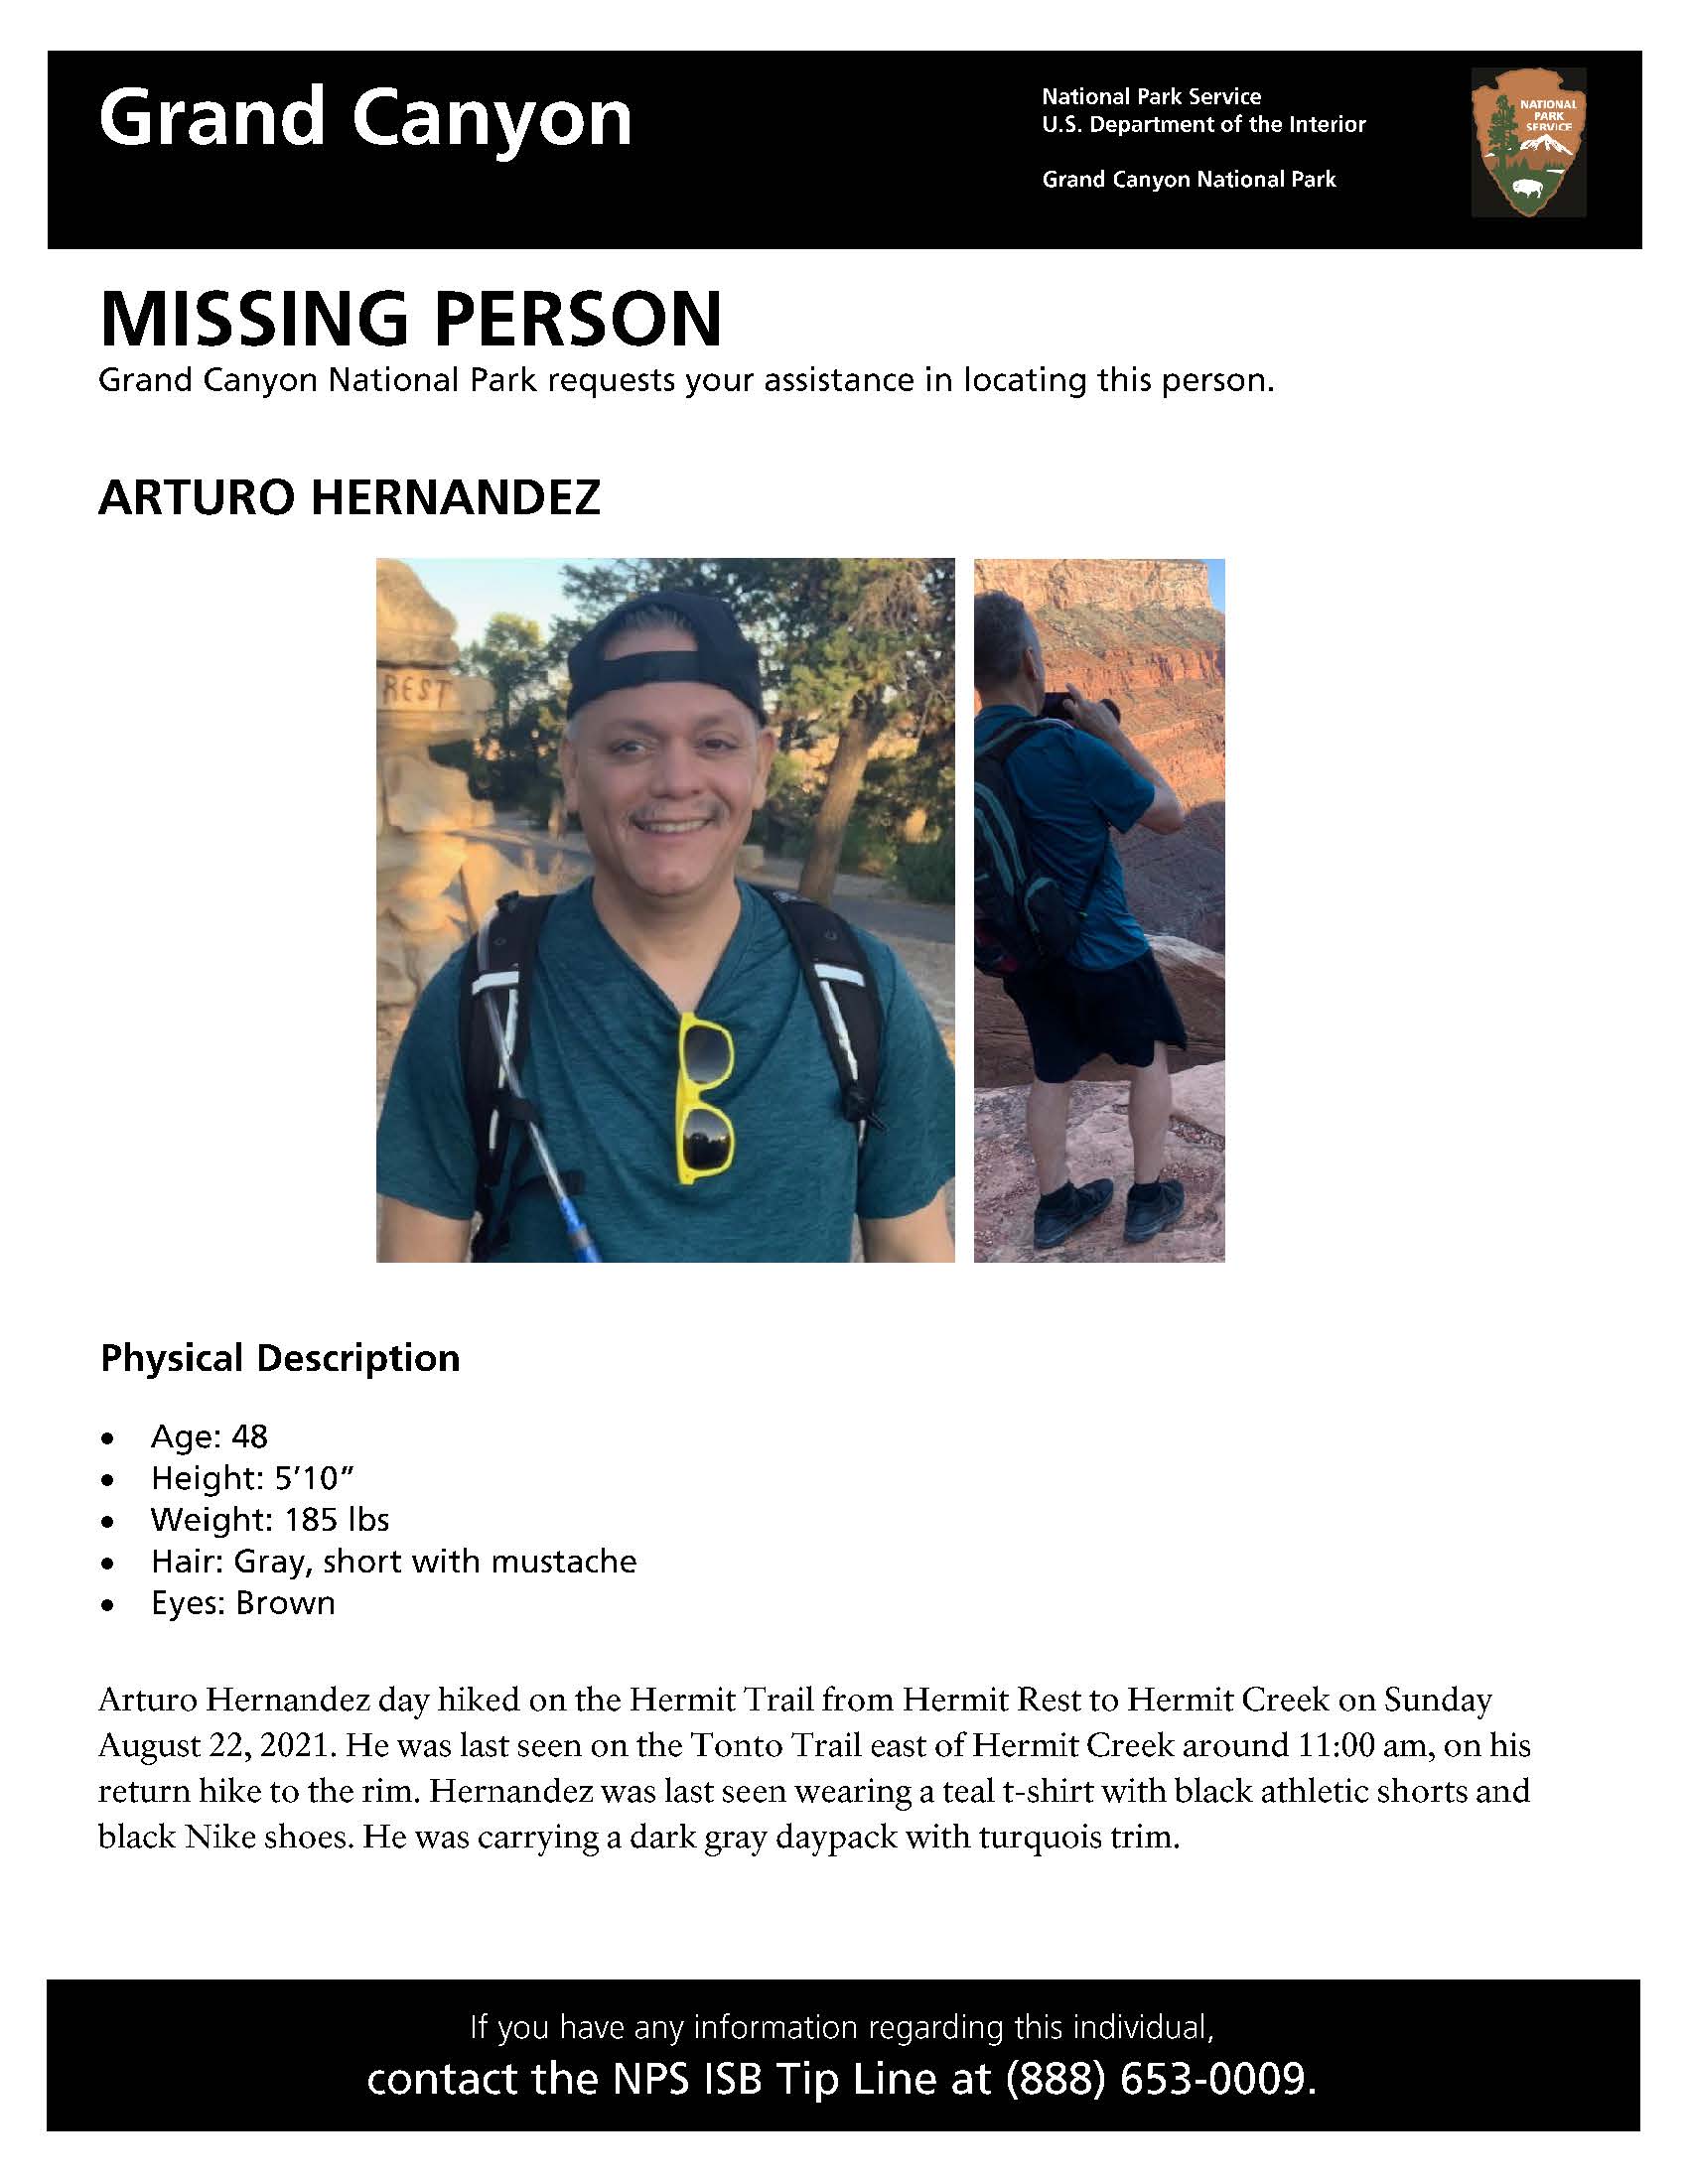 A missing person flyer featuring an adult male, 5’10” tall, 185 pounds, with gray hair and brown eyes. He was last seen carrying a black backpack, and wearing a blue shirt, black athletic shorts, and black Nike shoes.